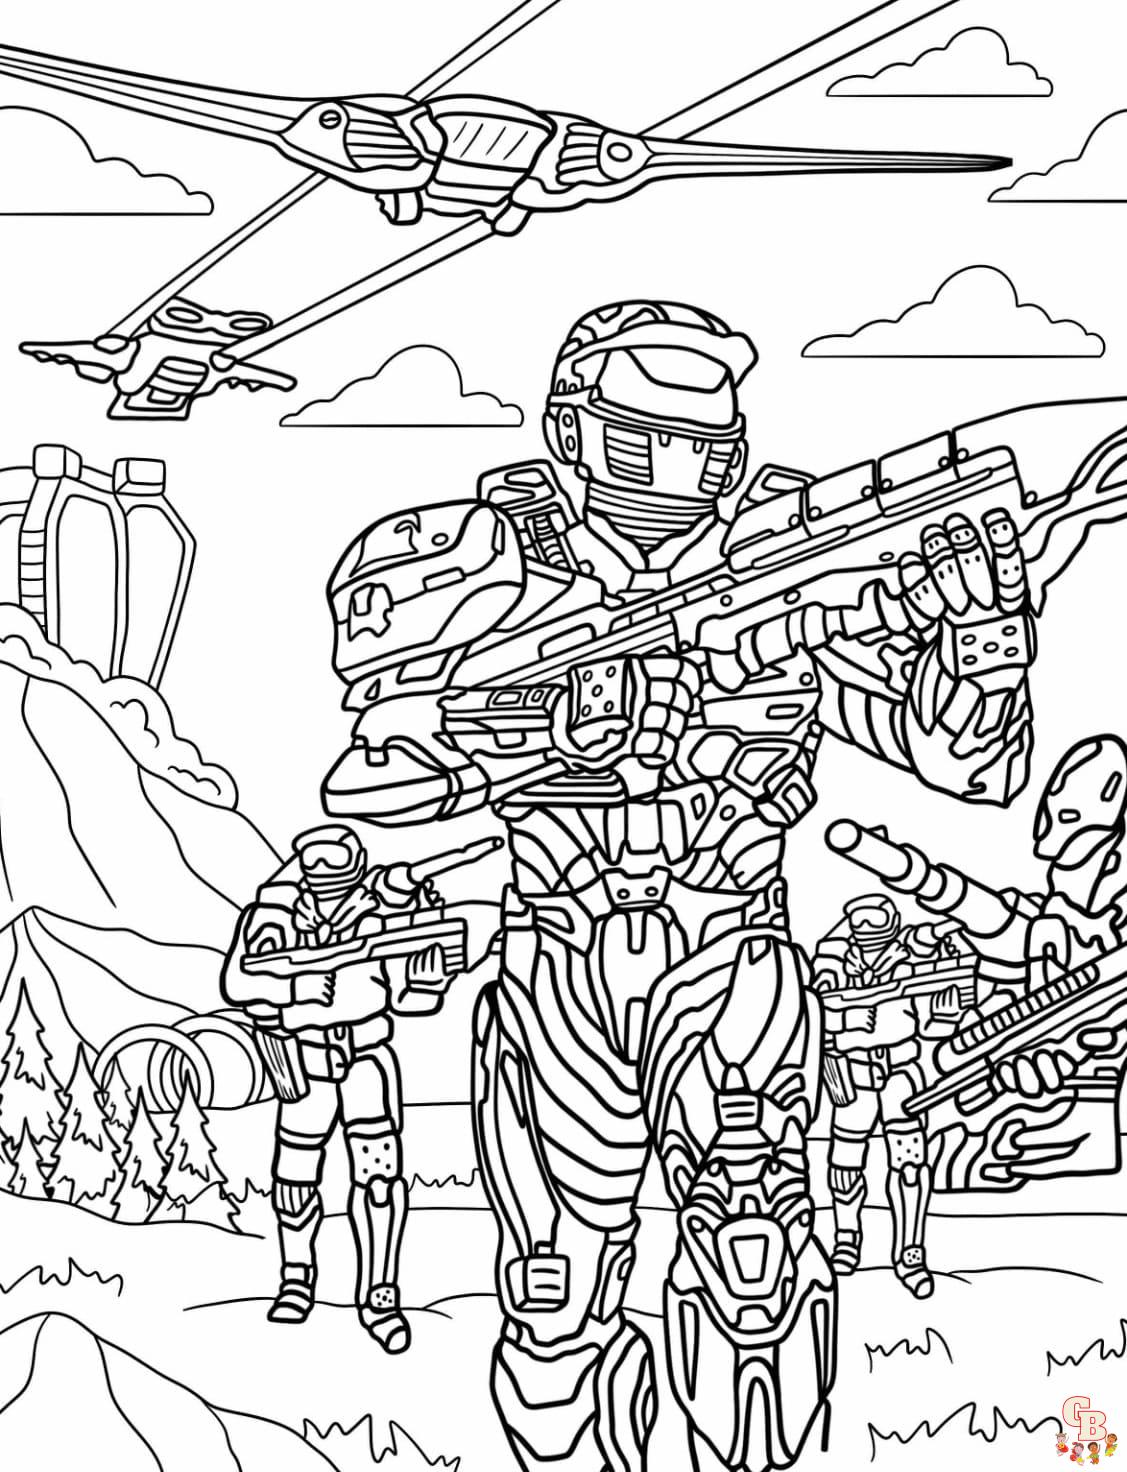 Master Chief Coloring Pages